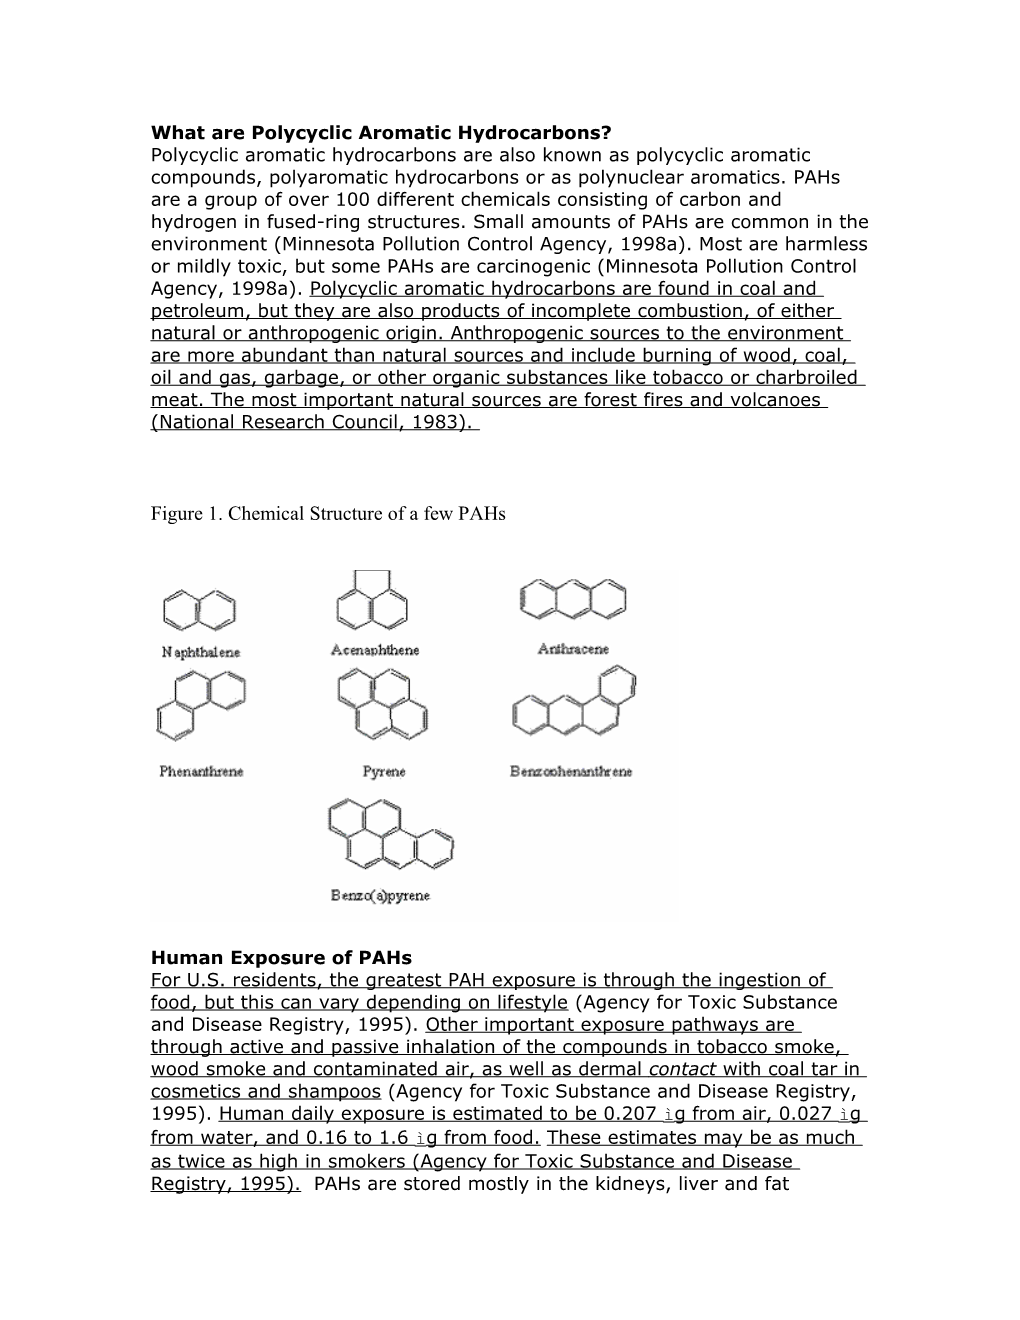 What Are Polycyclic Aromatic Hydrocarbons